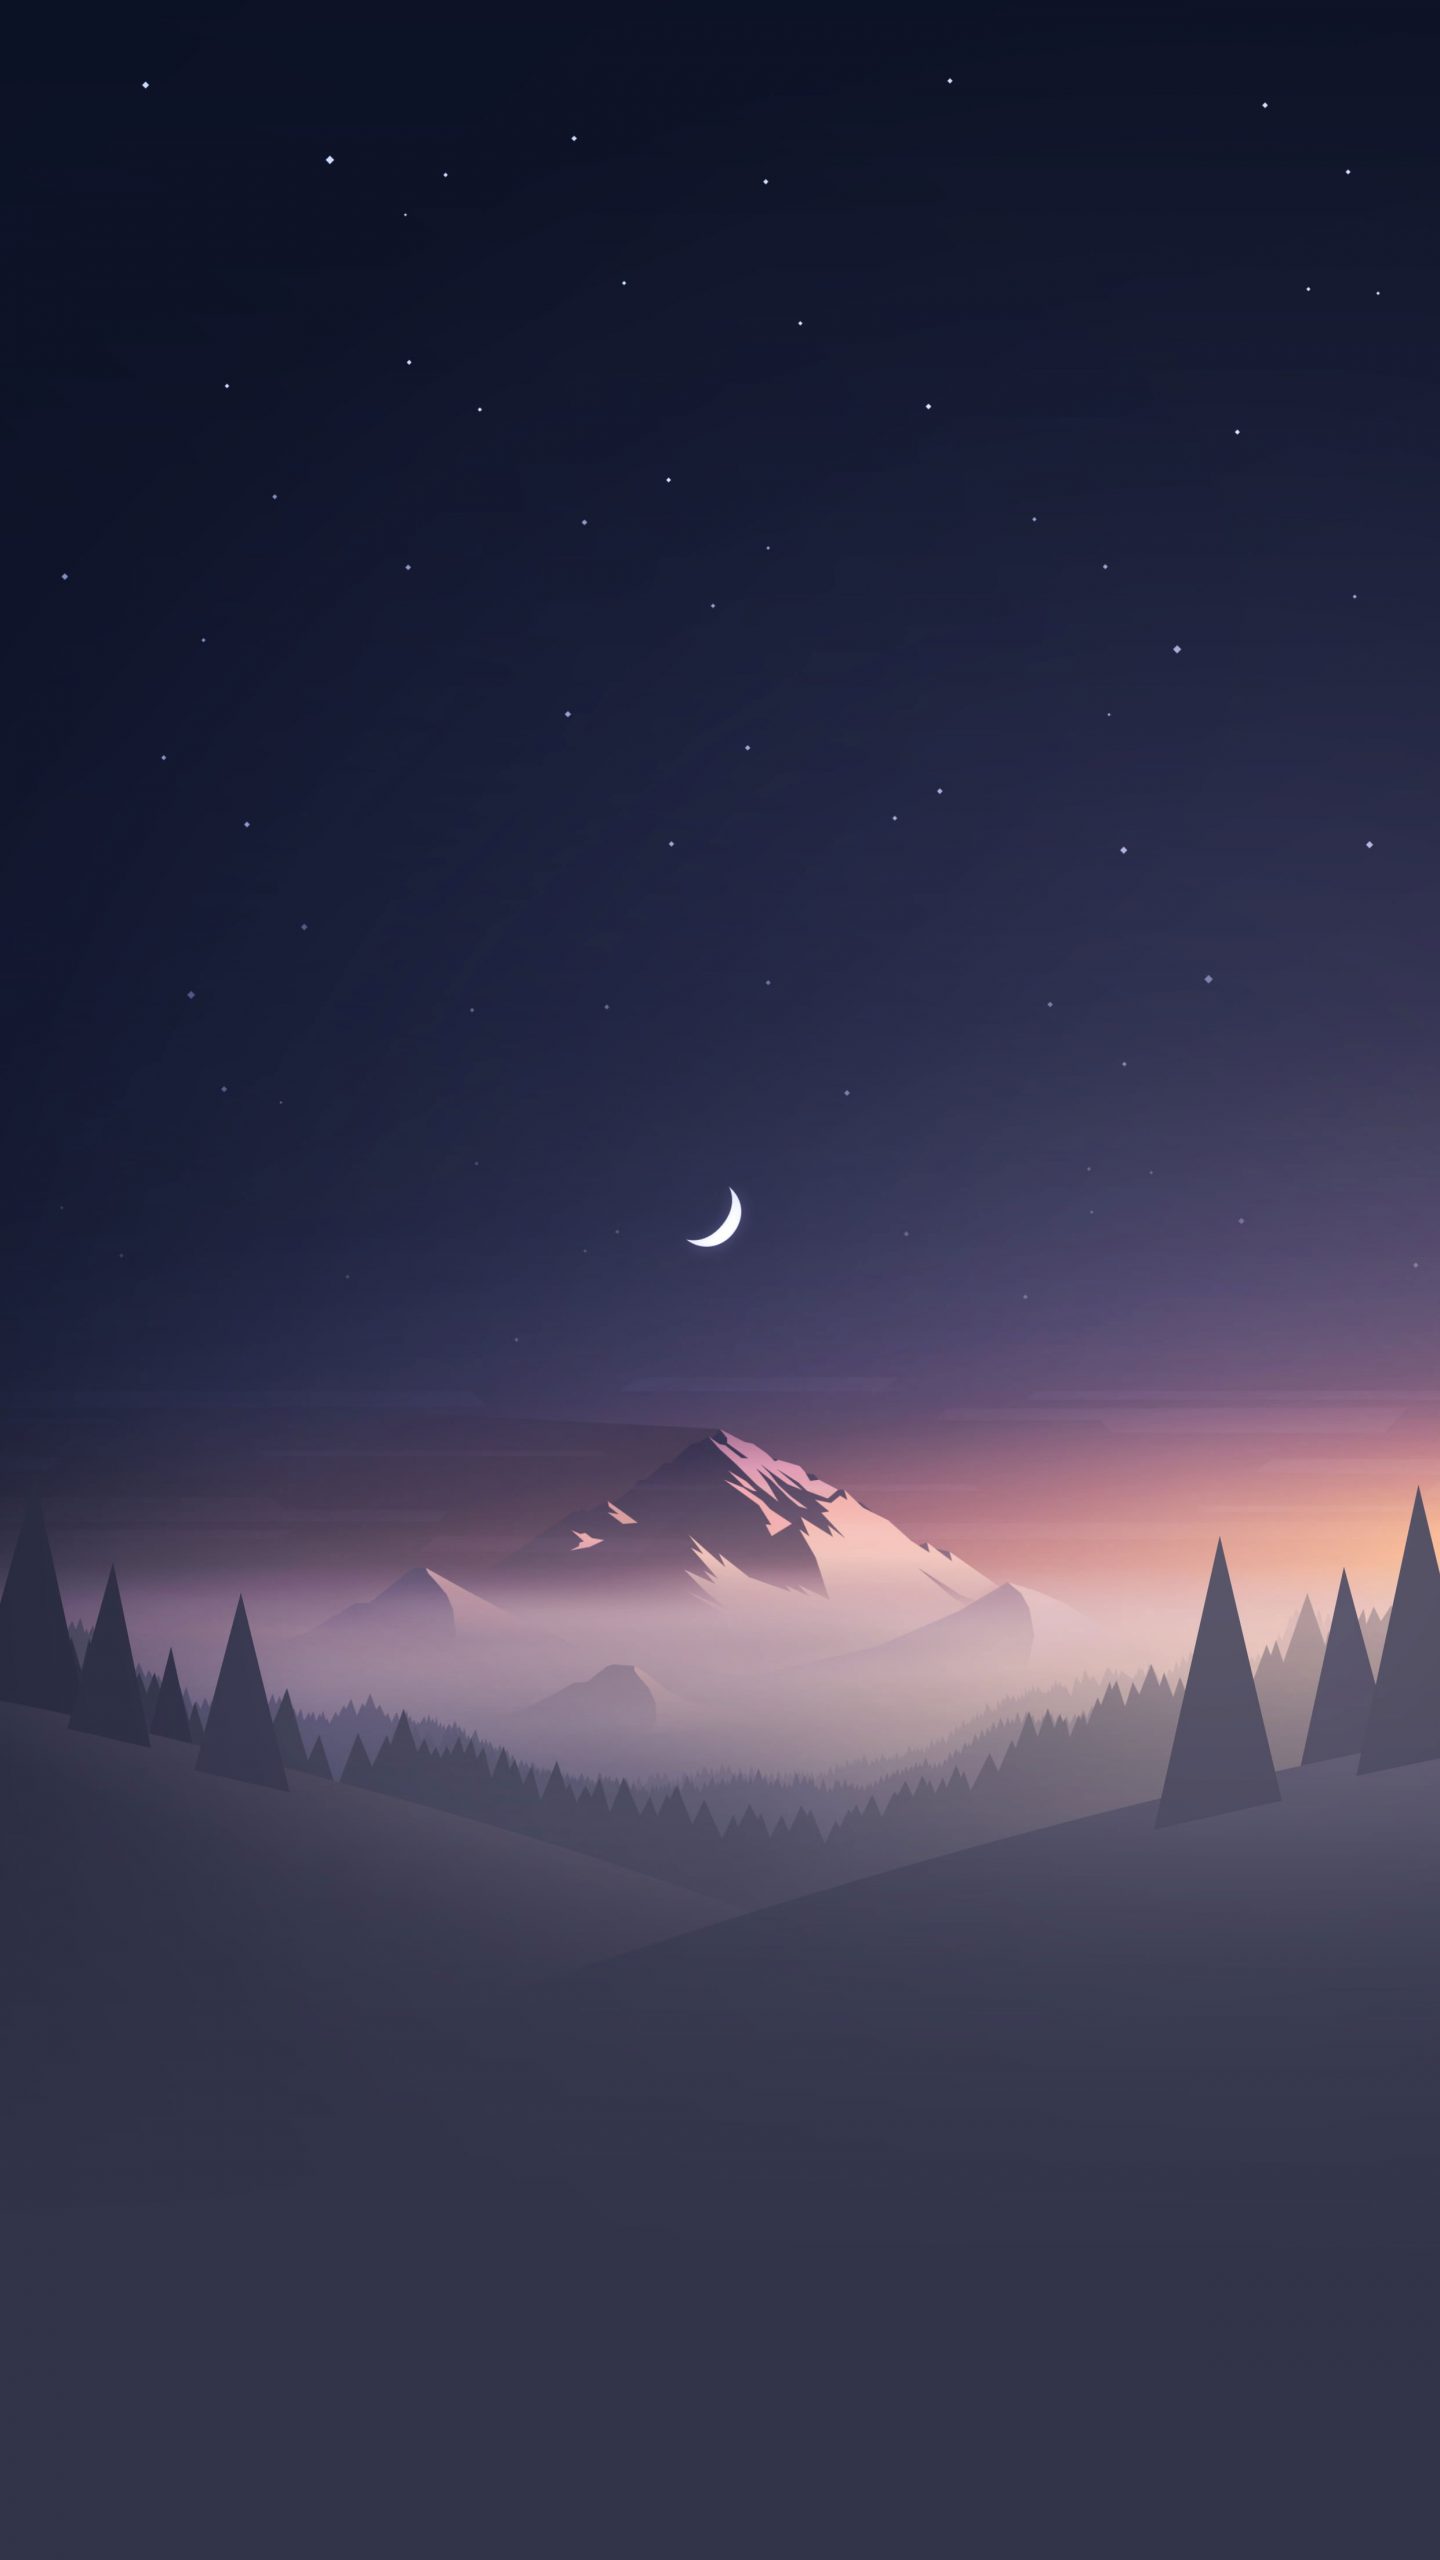 Wallpaper Mountain And Trees Under Starry Sky Illustration